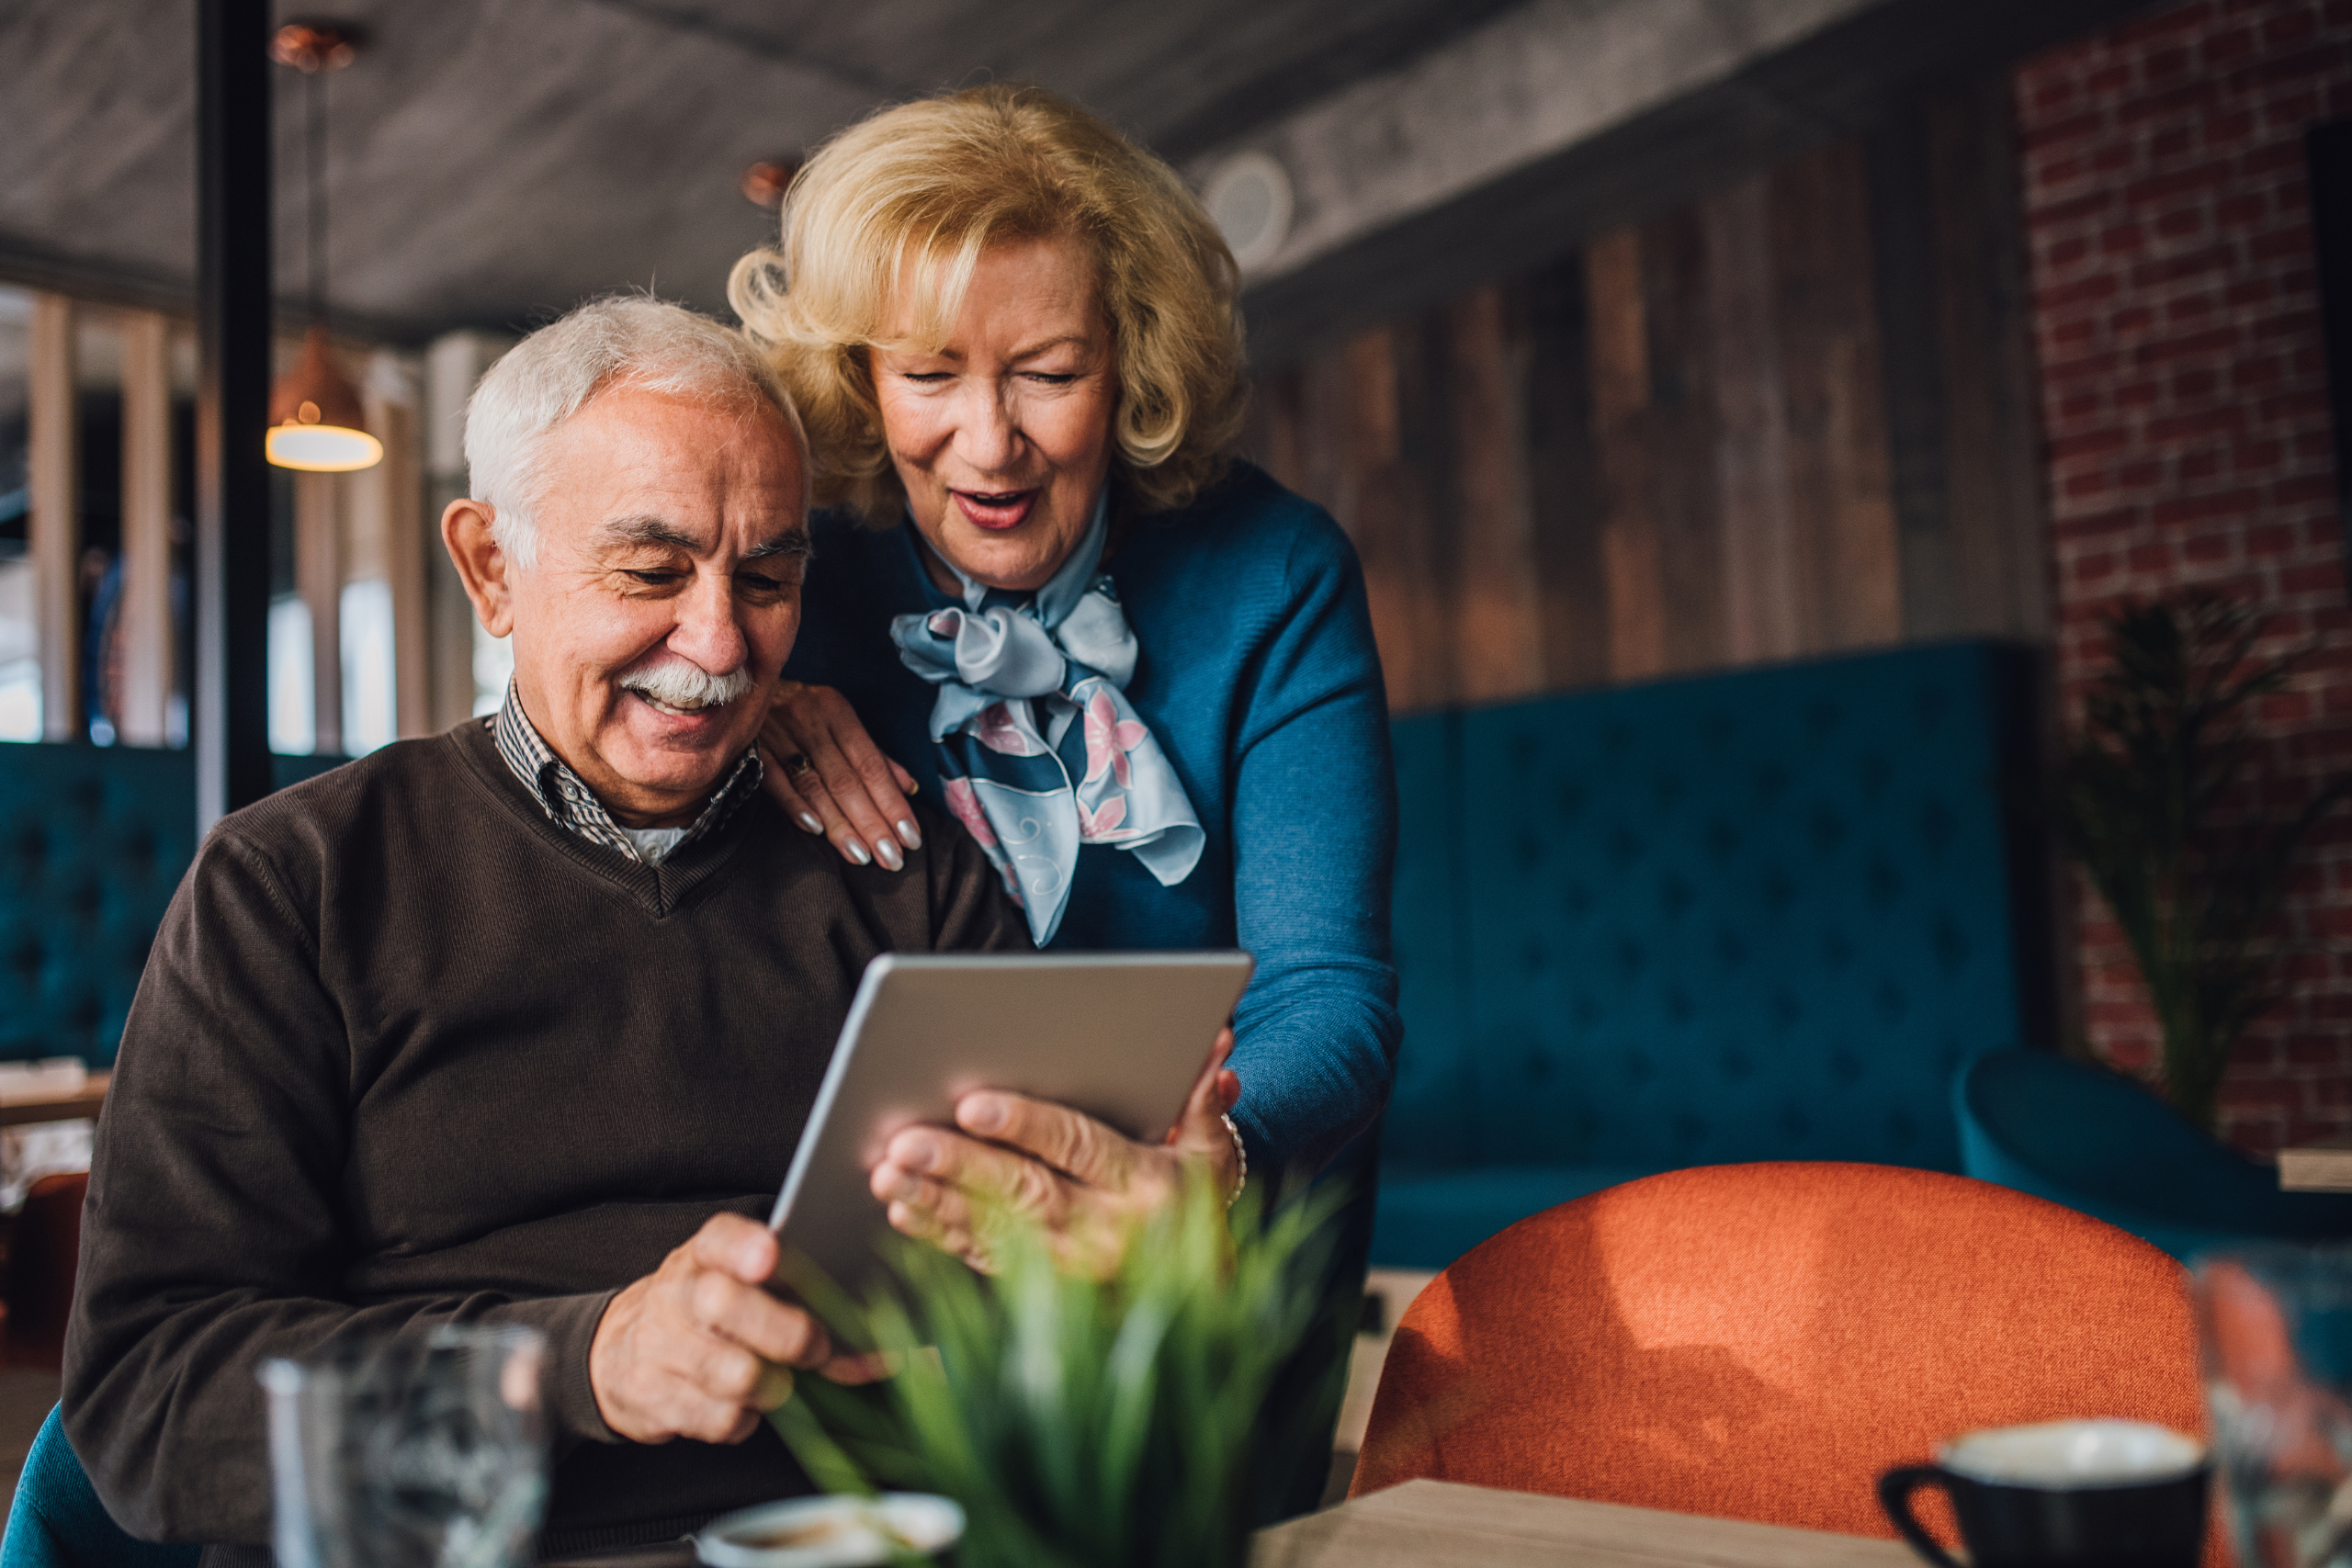 A senior man and woman smile while looking at a tablet device.